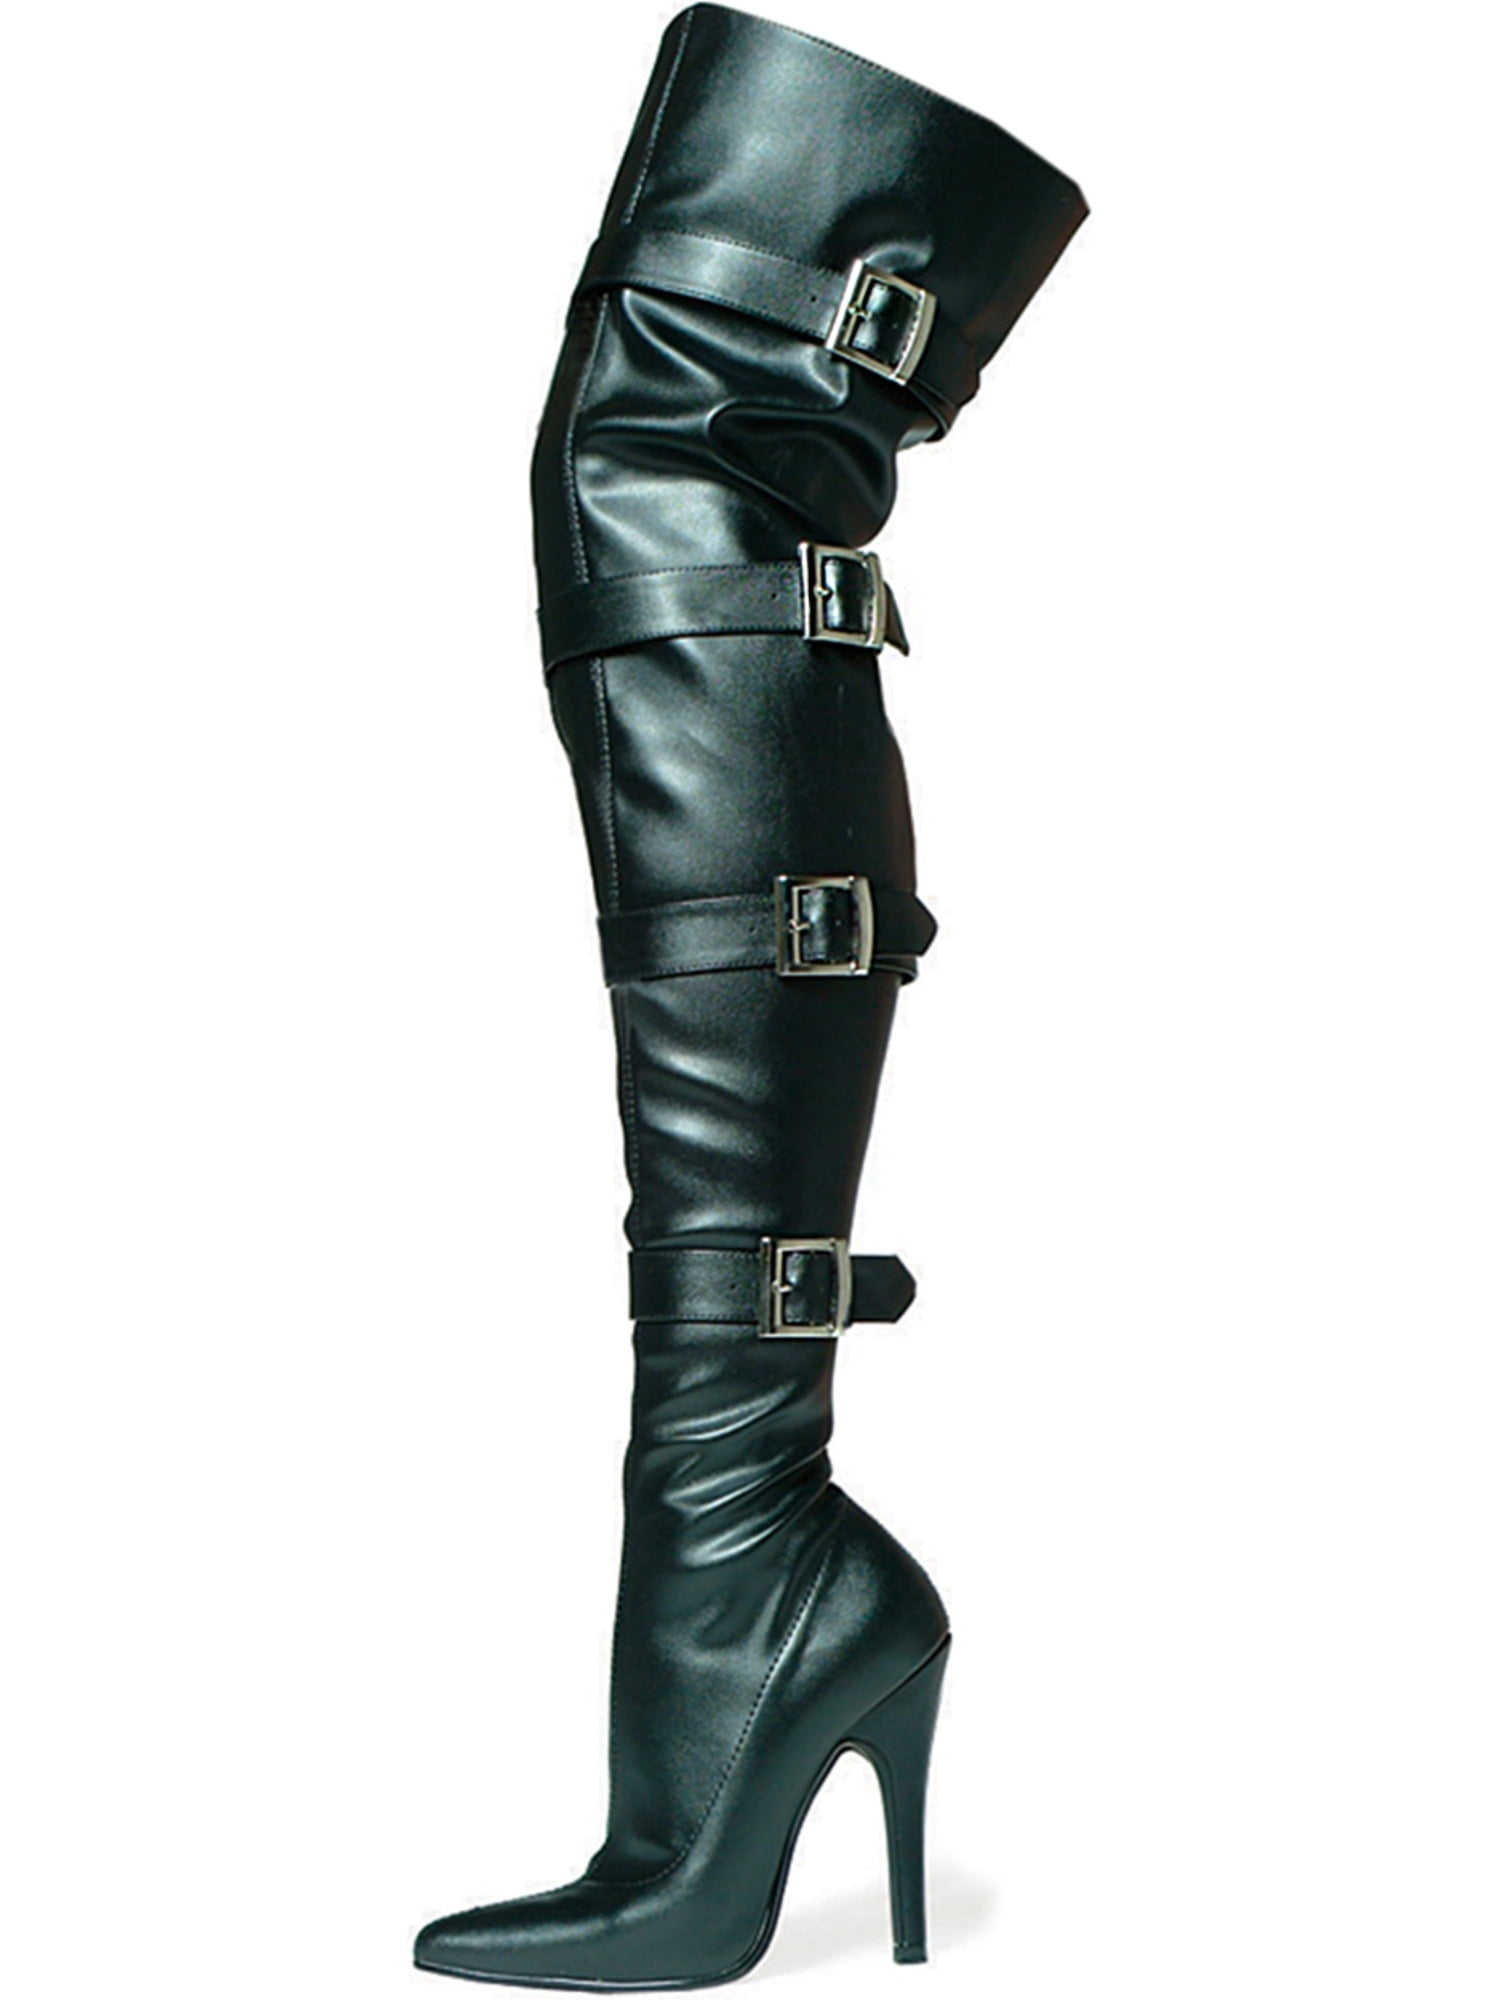 thigh high buckle boots